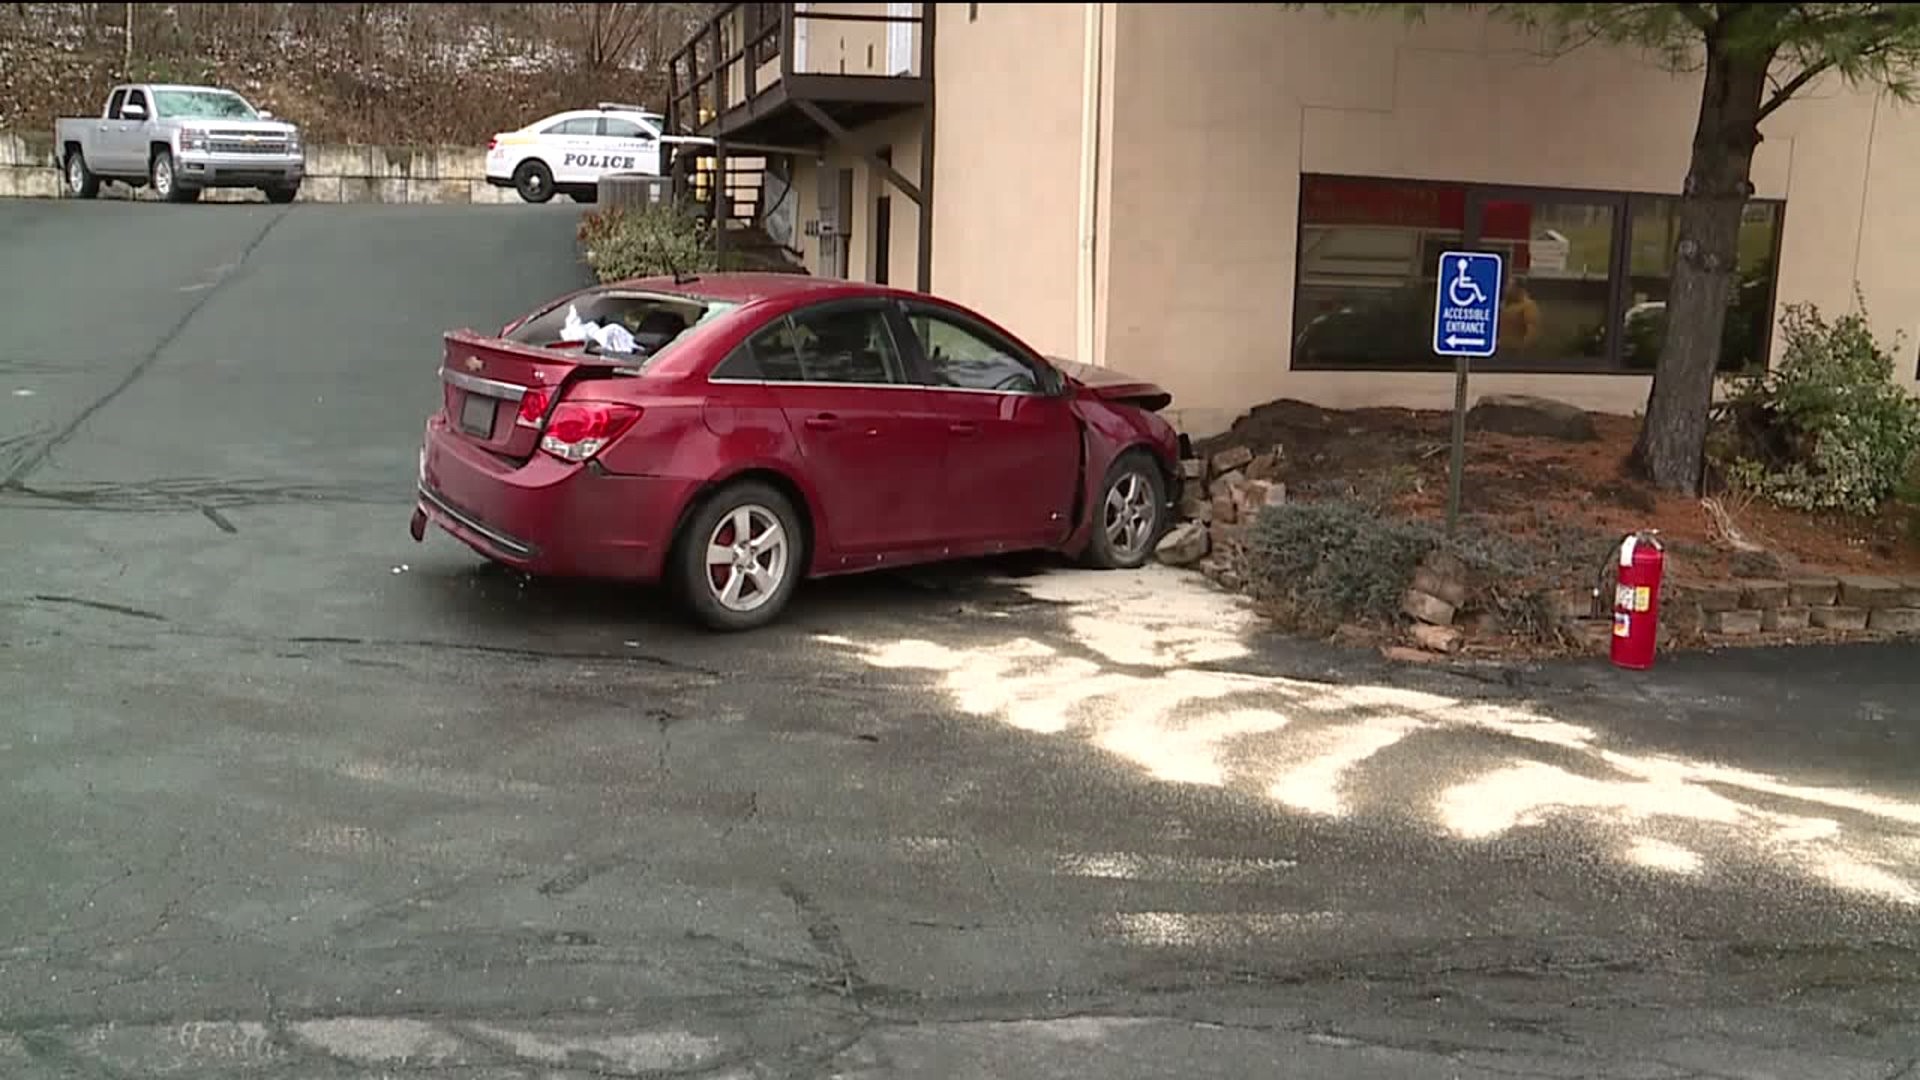 Driver Hurt After Crashing into Building